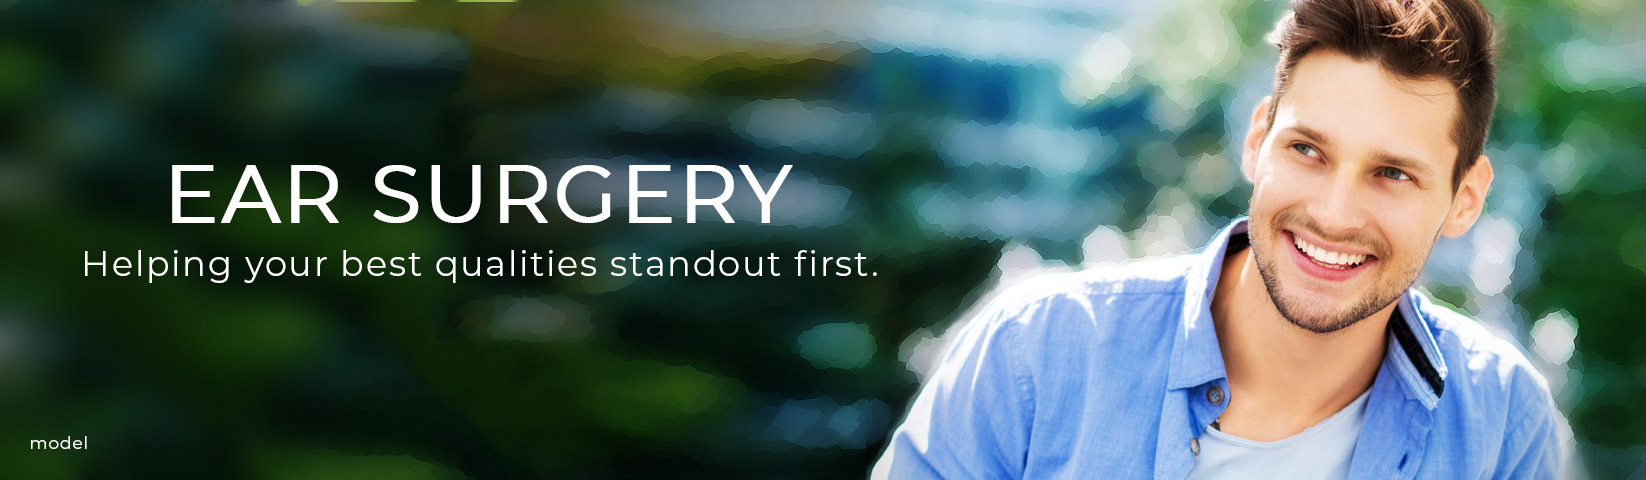 Ear Surgery: Helping your best qualities standout first